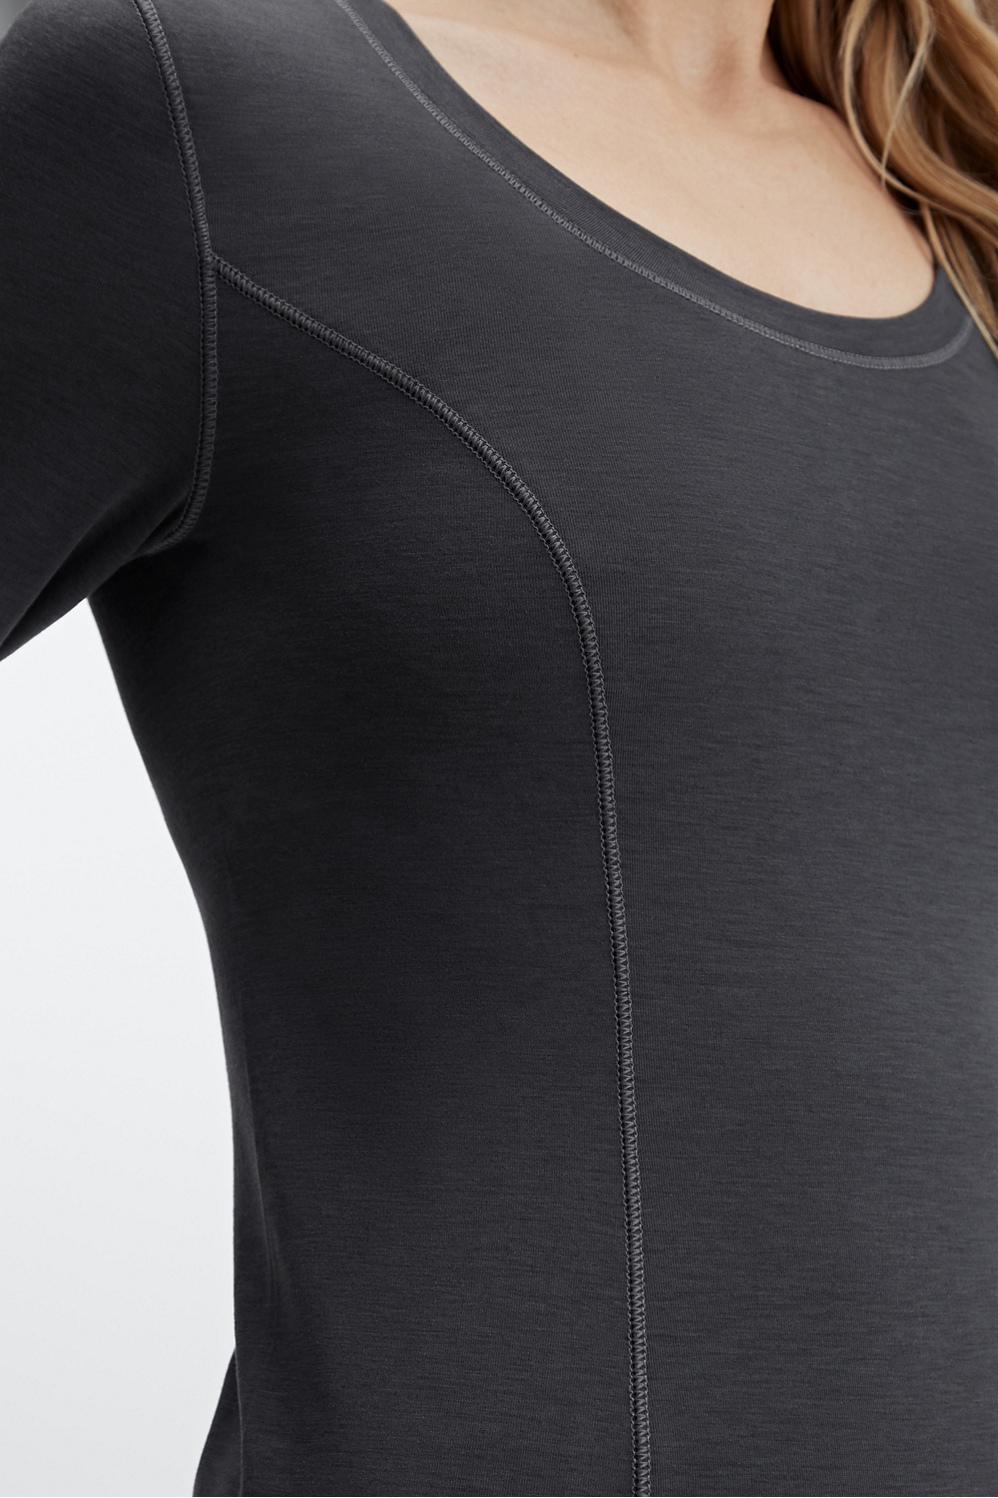 Wool Base Layer Long-Sleeve Top - Fabletics